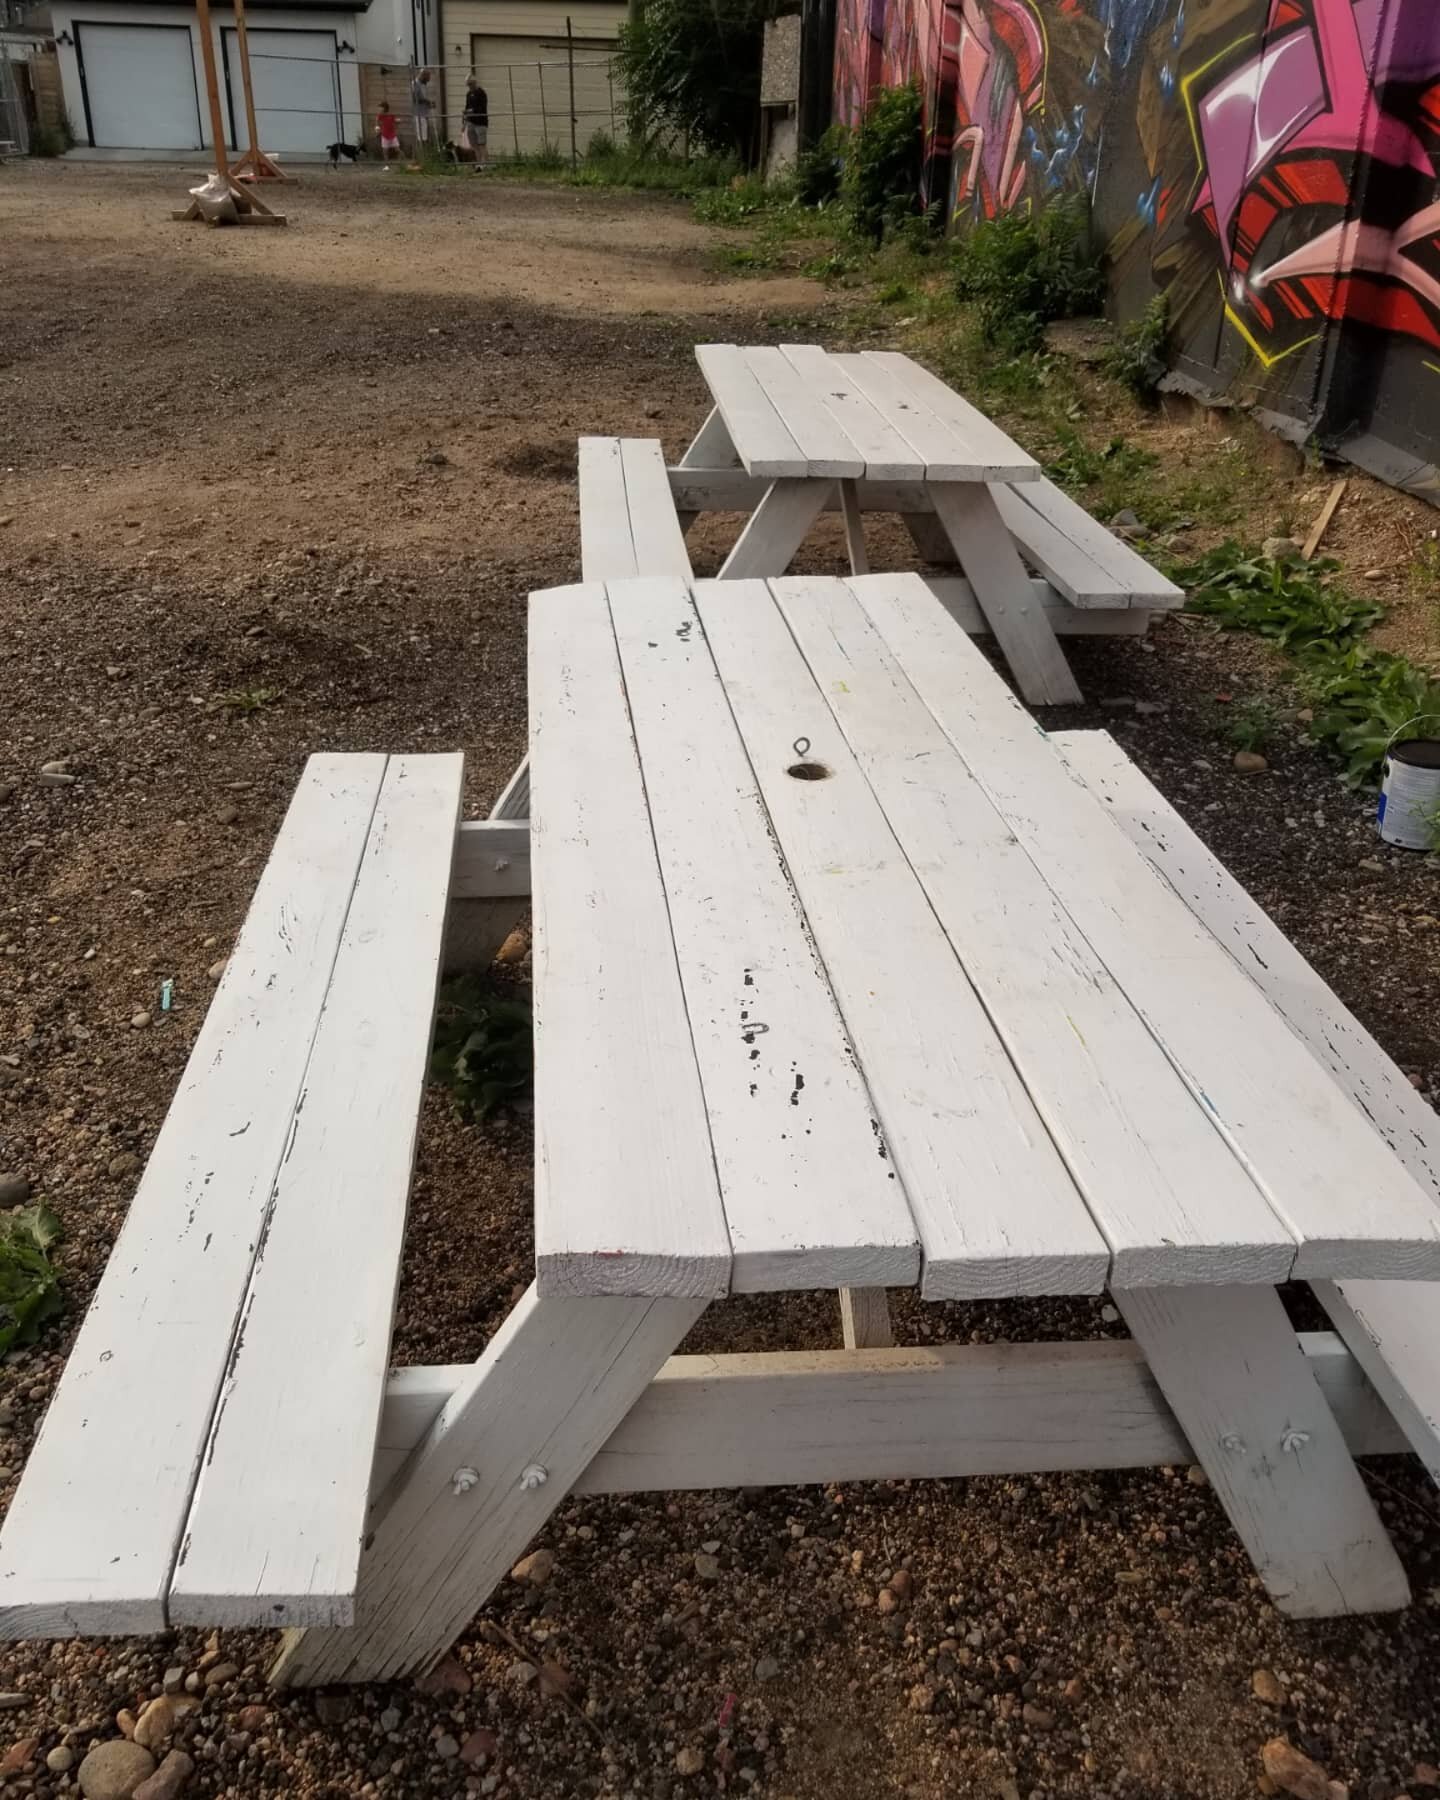 Before and after photos of my latest picnic table project! Which table is your favorite?